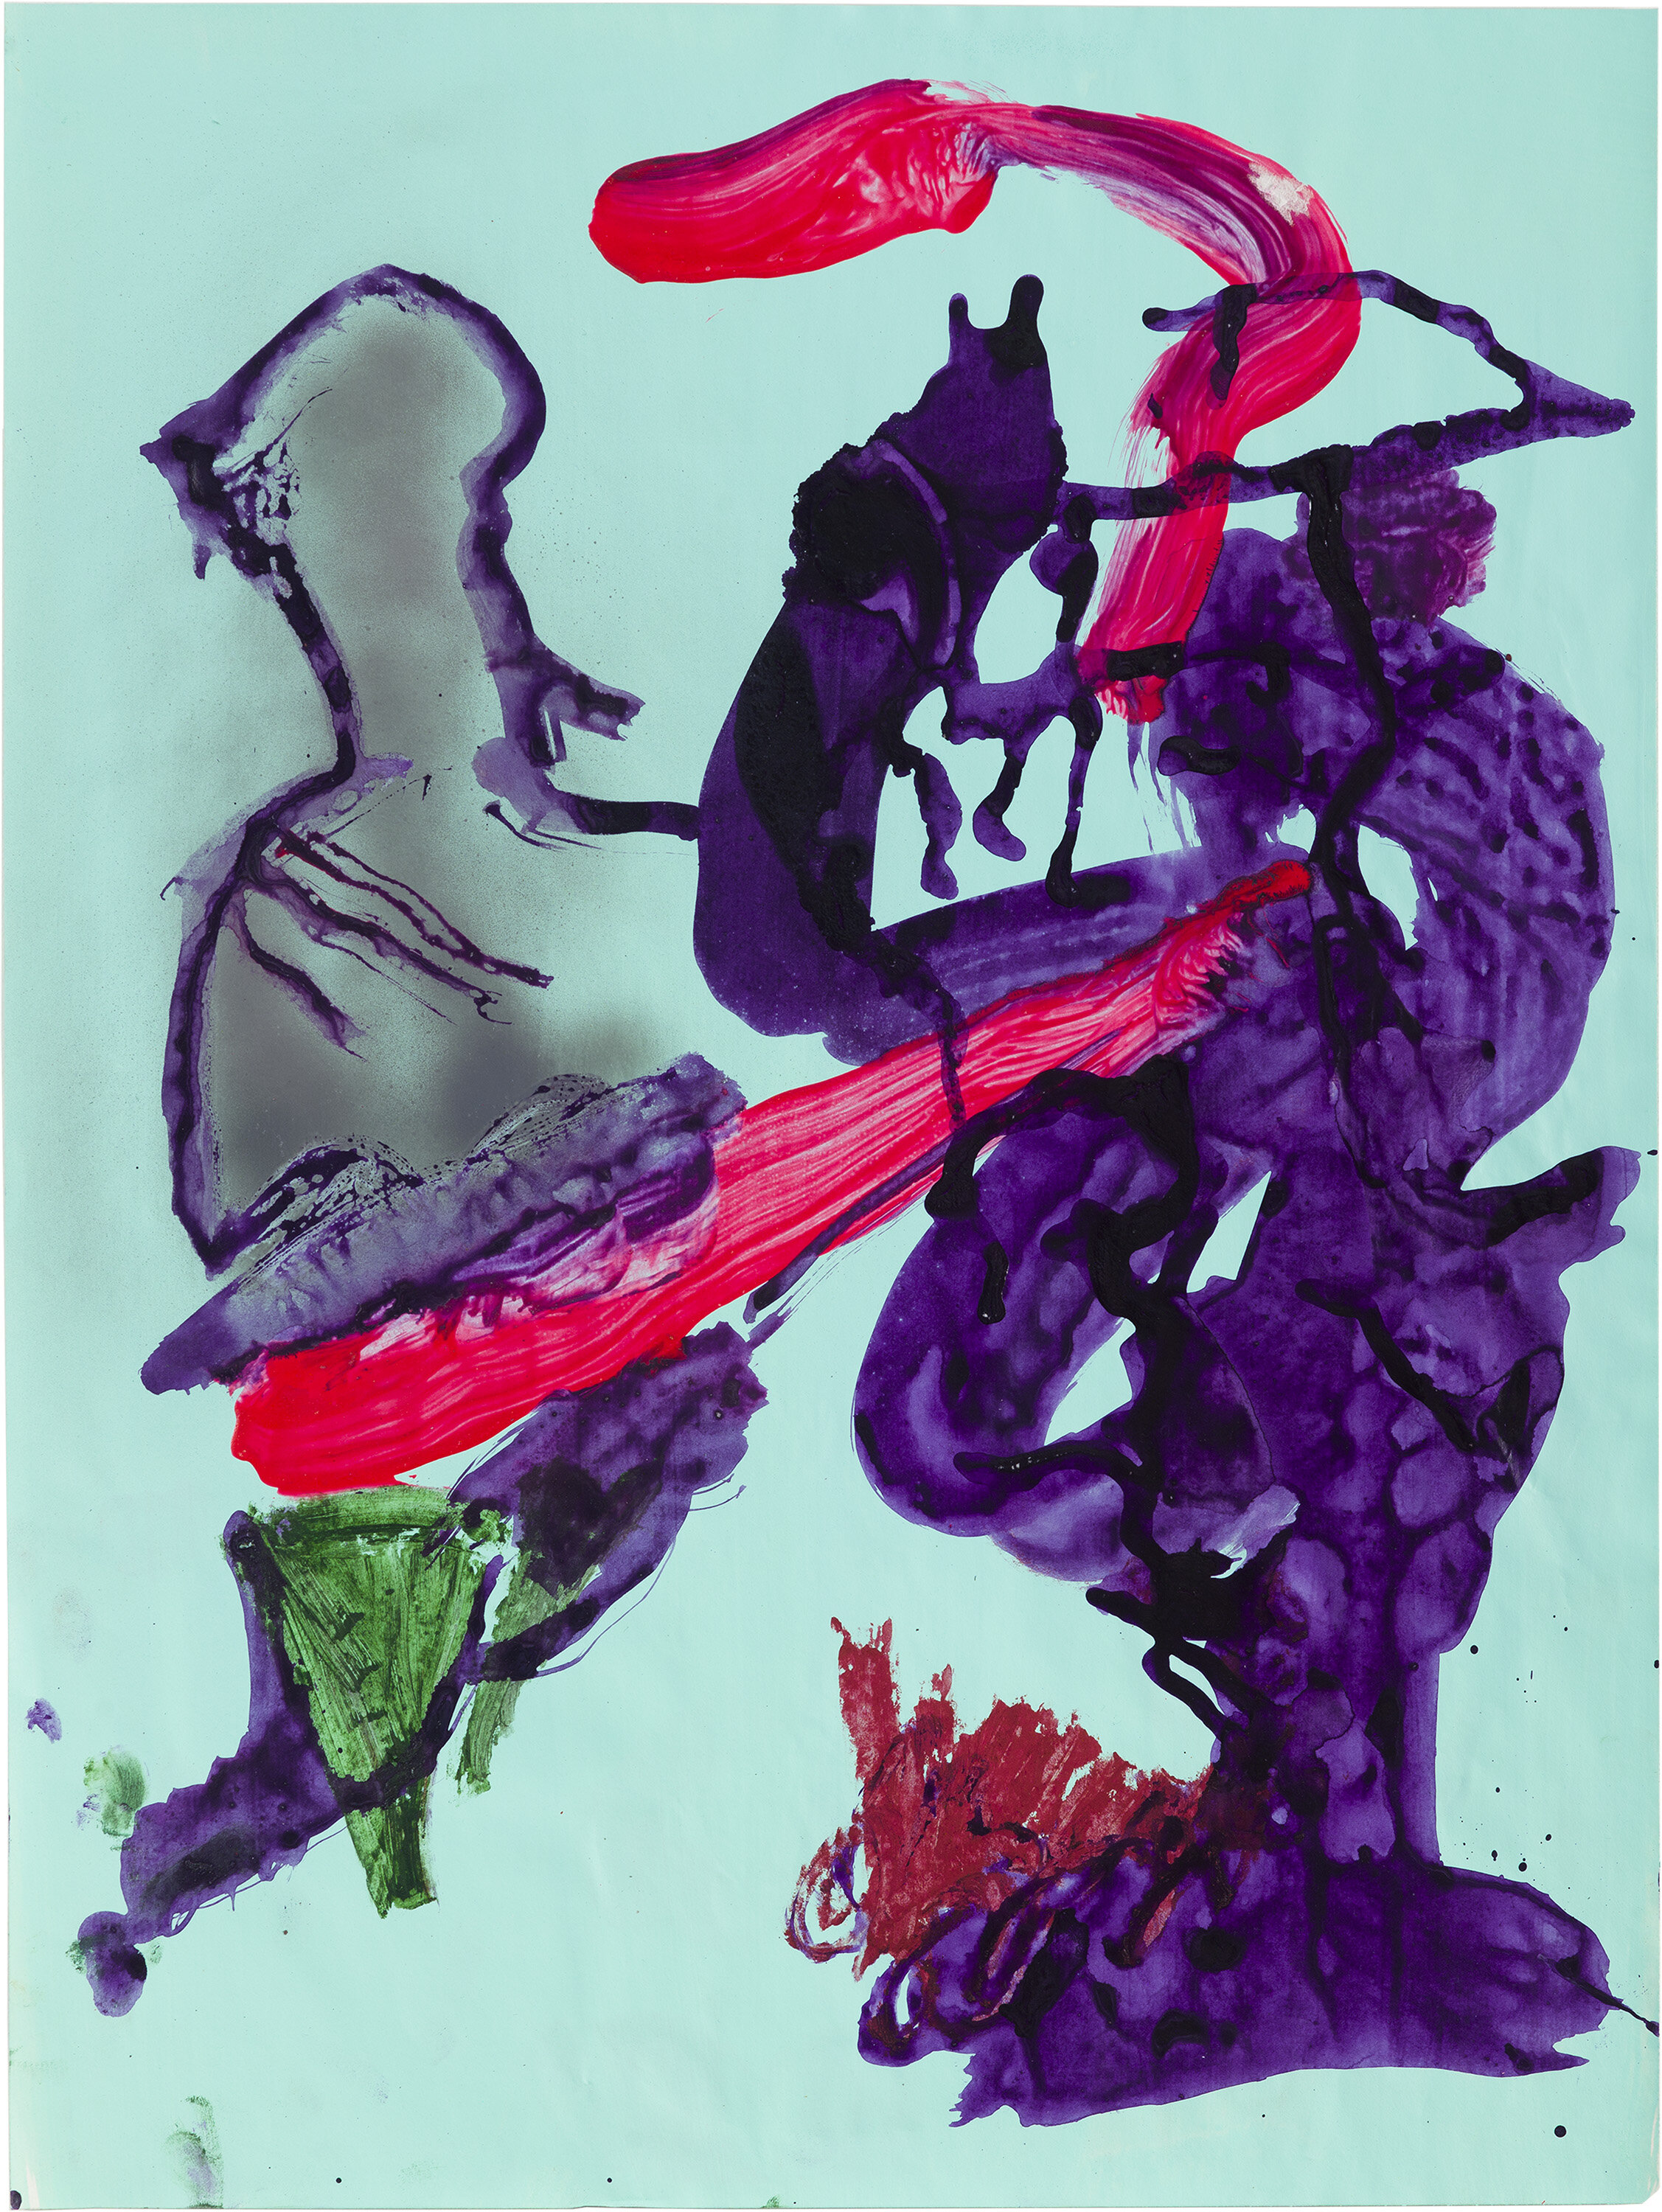  Drew Beattie and Ben Shepard   DBBS-DRW-2015-012   2015  acrylic and spray paint on paper  24 x 18 inches 